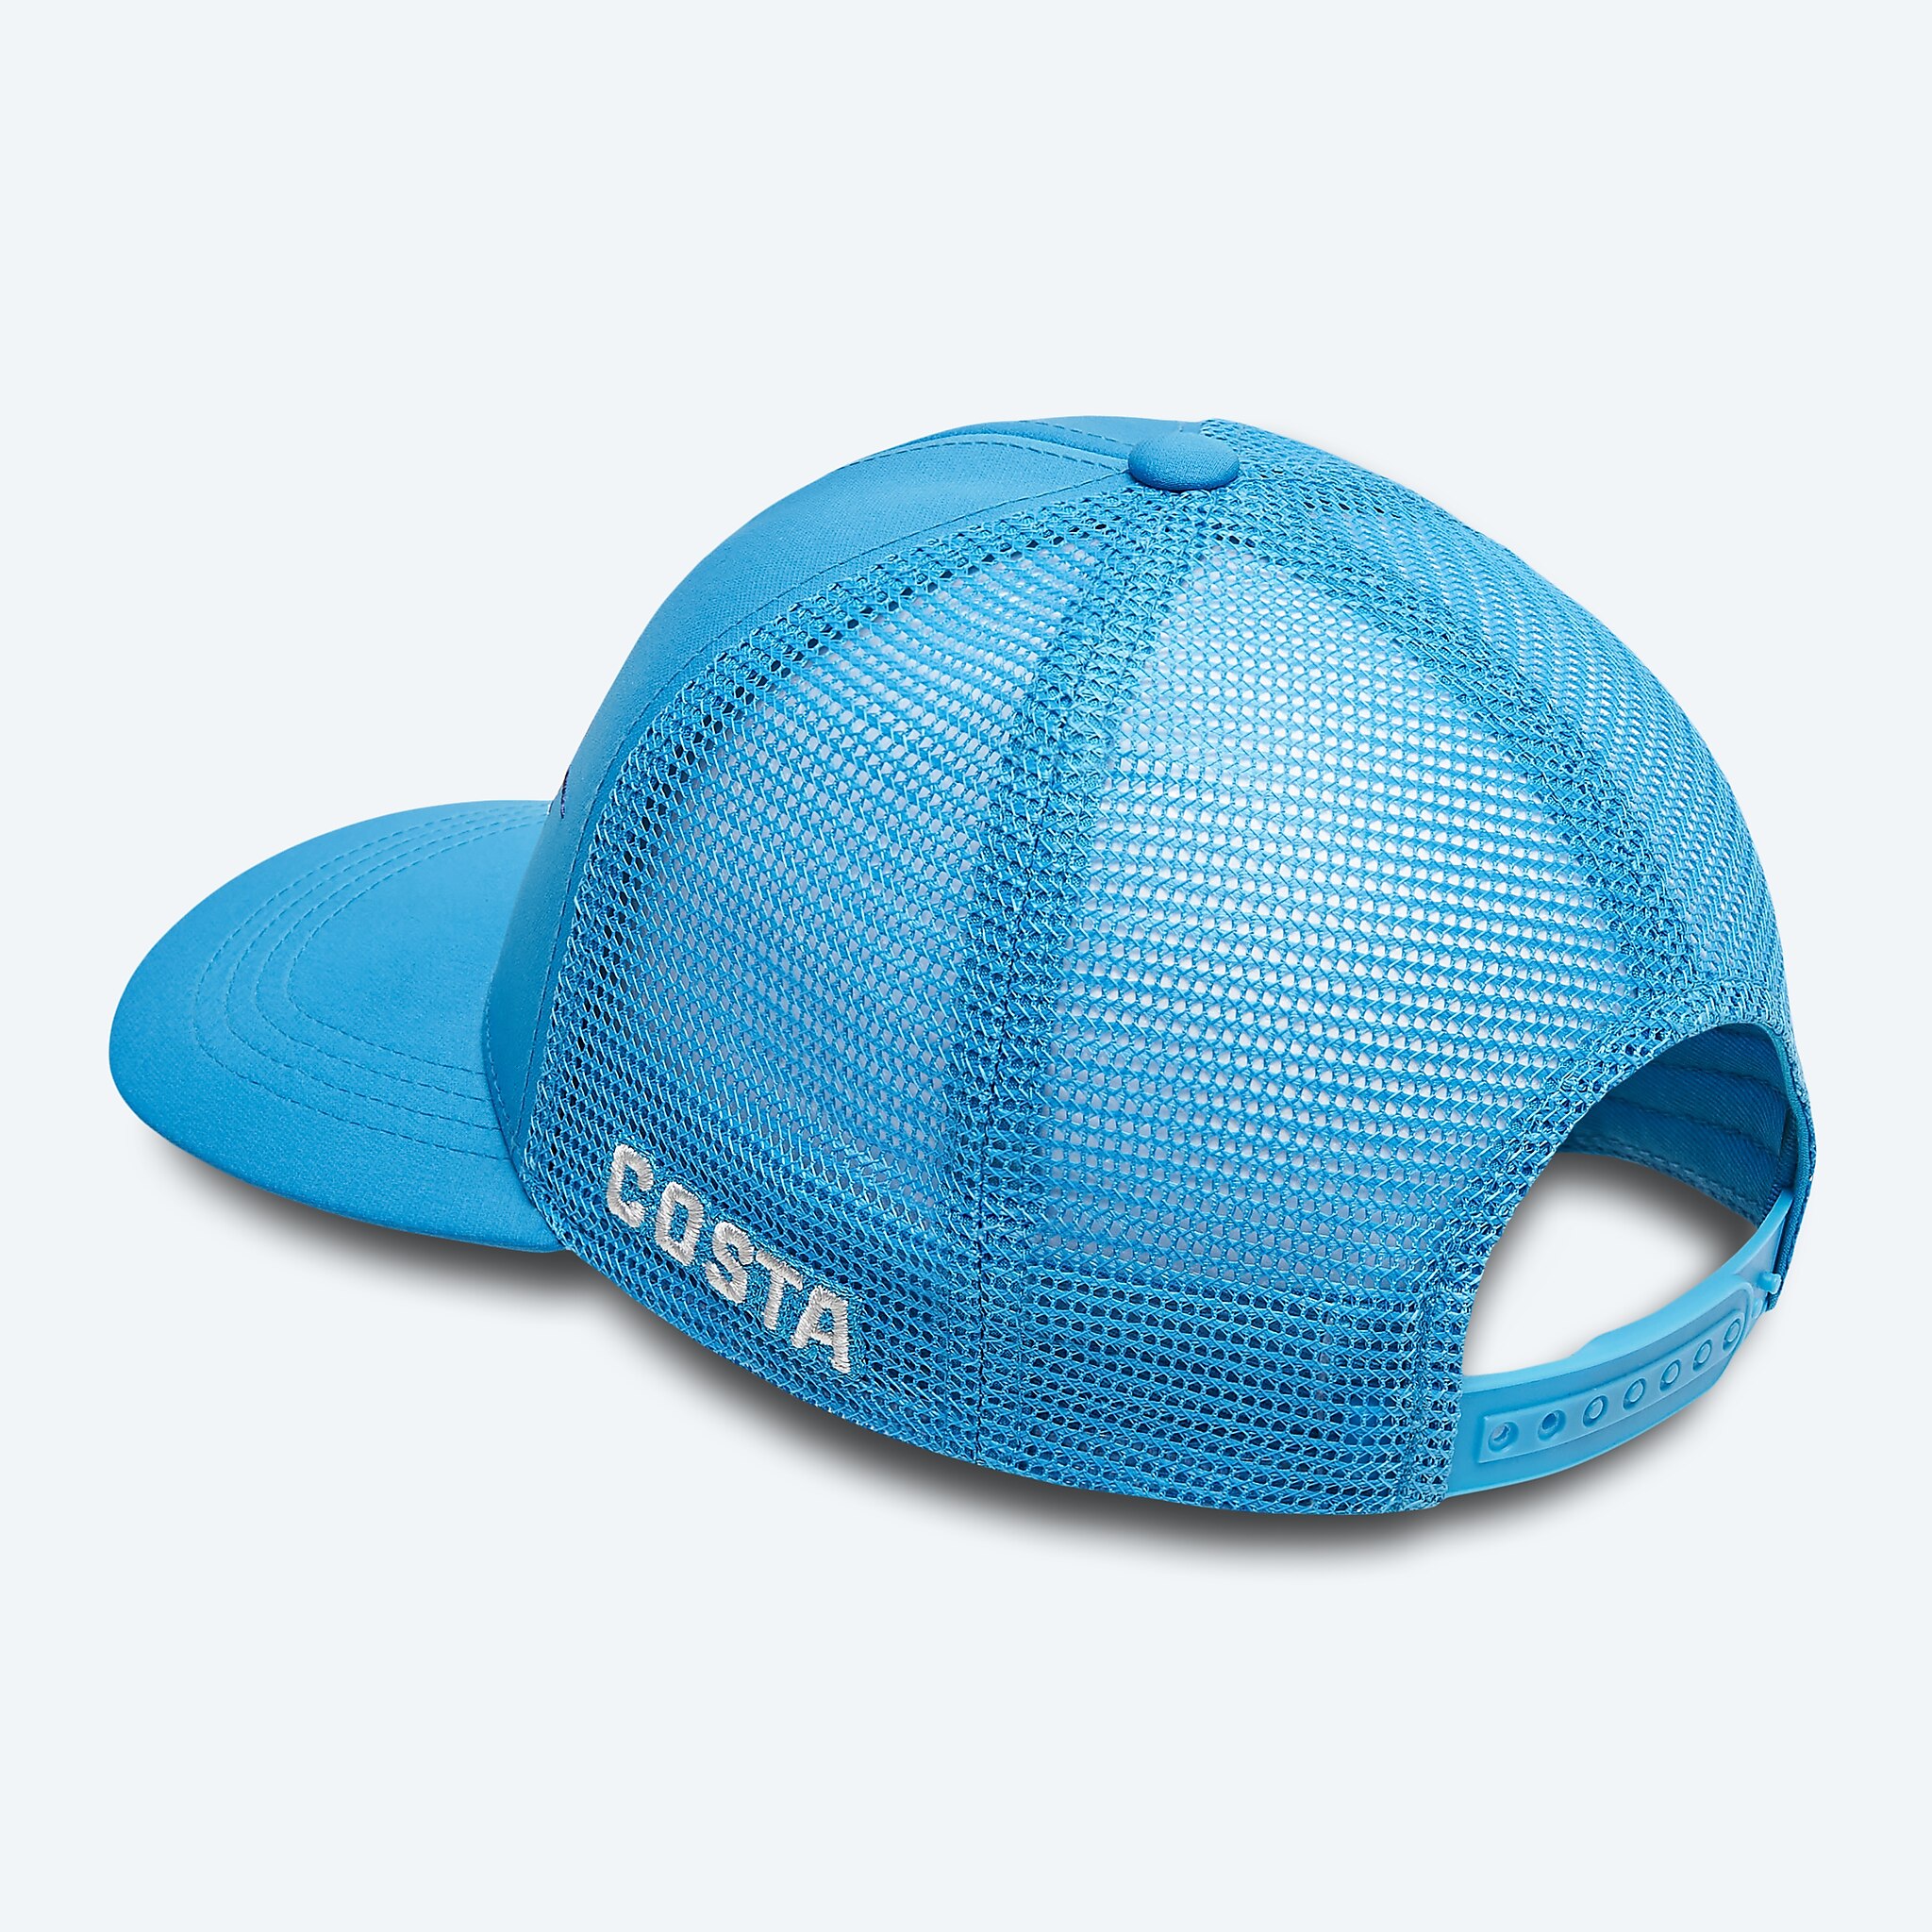 Costa Fishing Hat Cap Snap Back Water Print Patch One Size Blue Del Mar